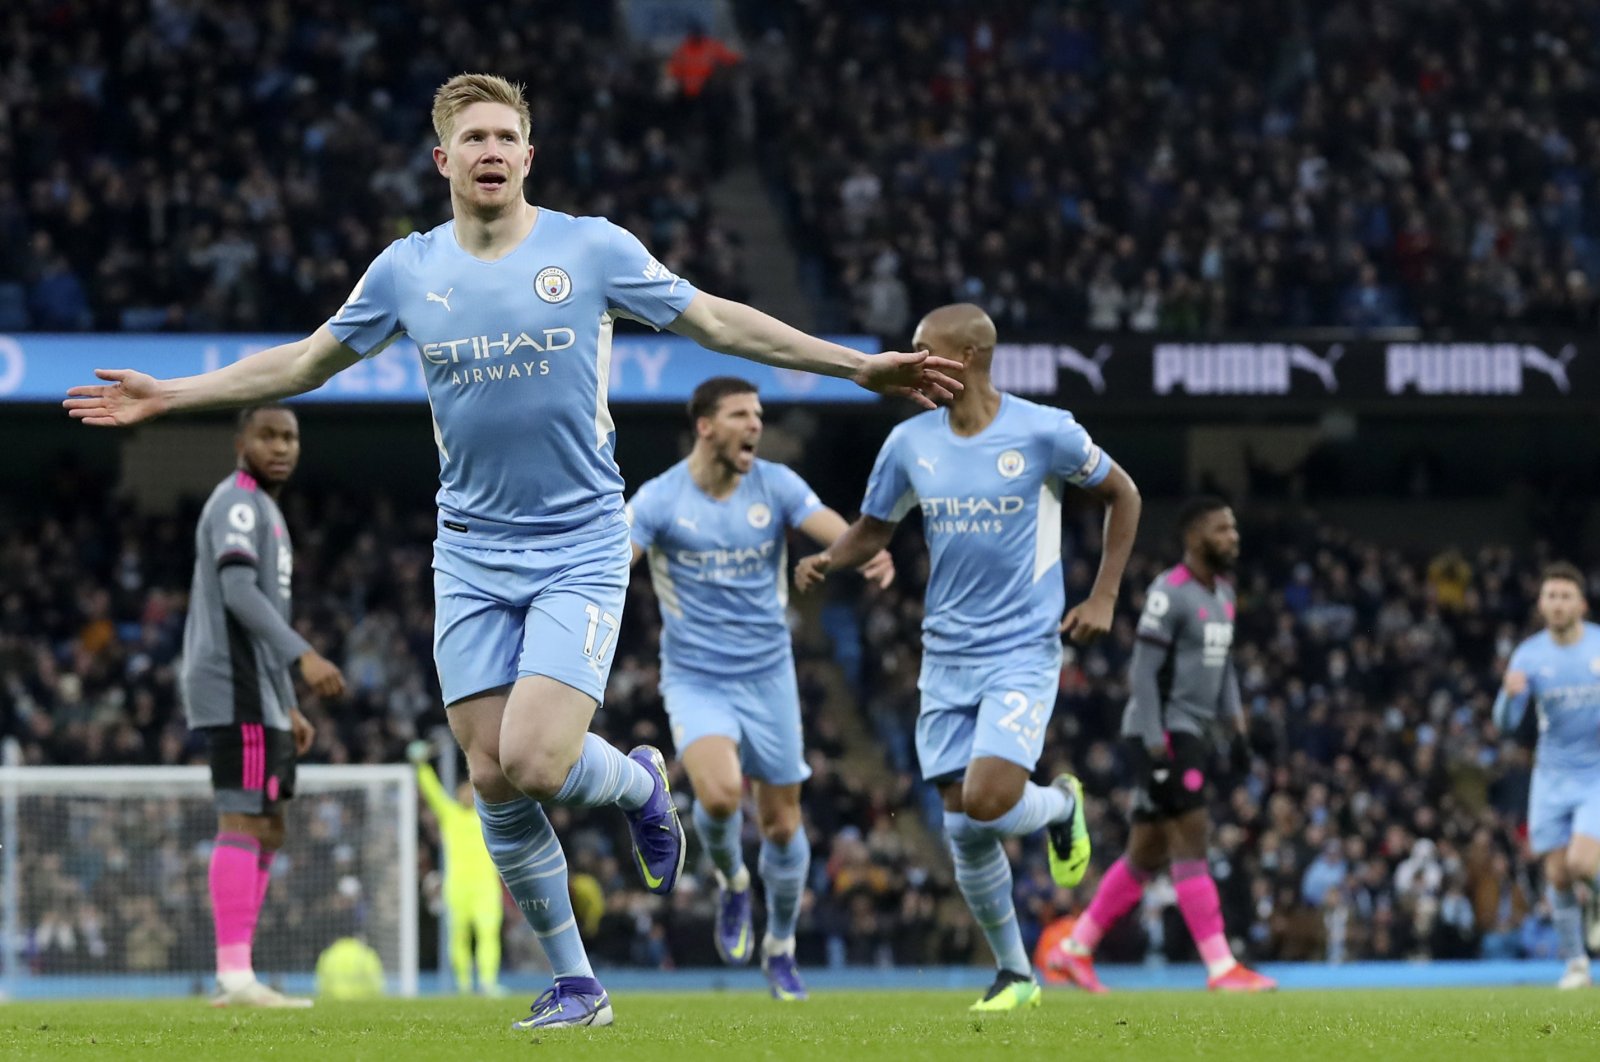 Man City&#039;s Kevin De Bruyne (L) celebrates after scoring in a Premier League game against Leicester City at the Etihad Stadium, Manchester, England, Dec. 26, 2021. (AP Photo)